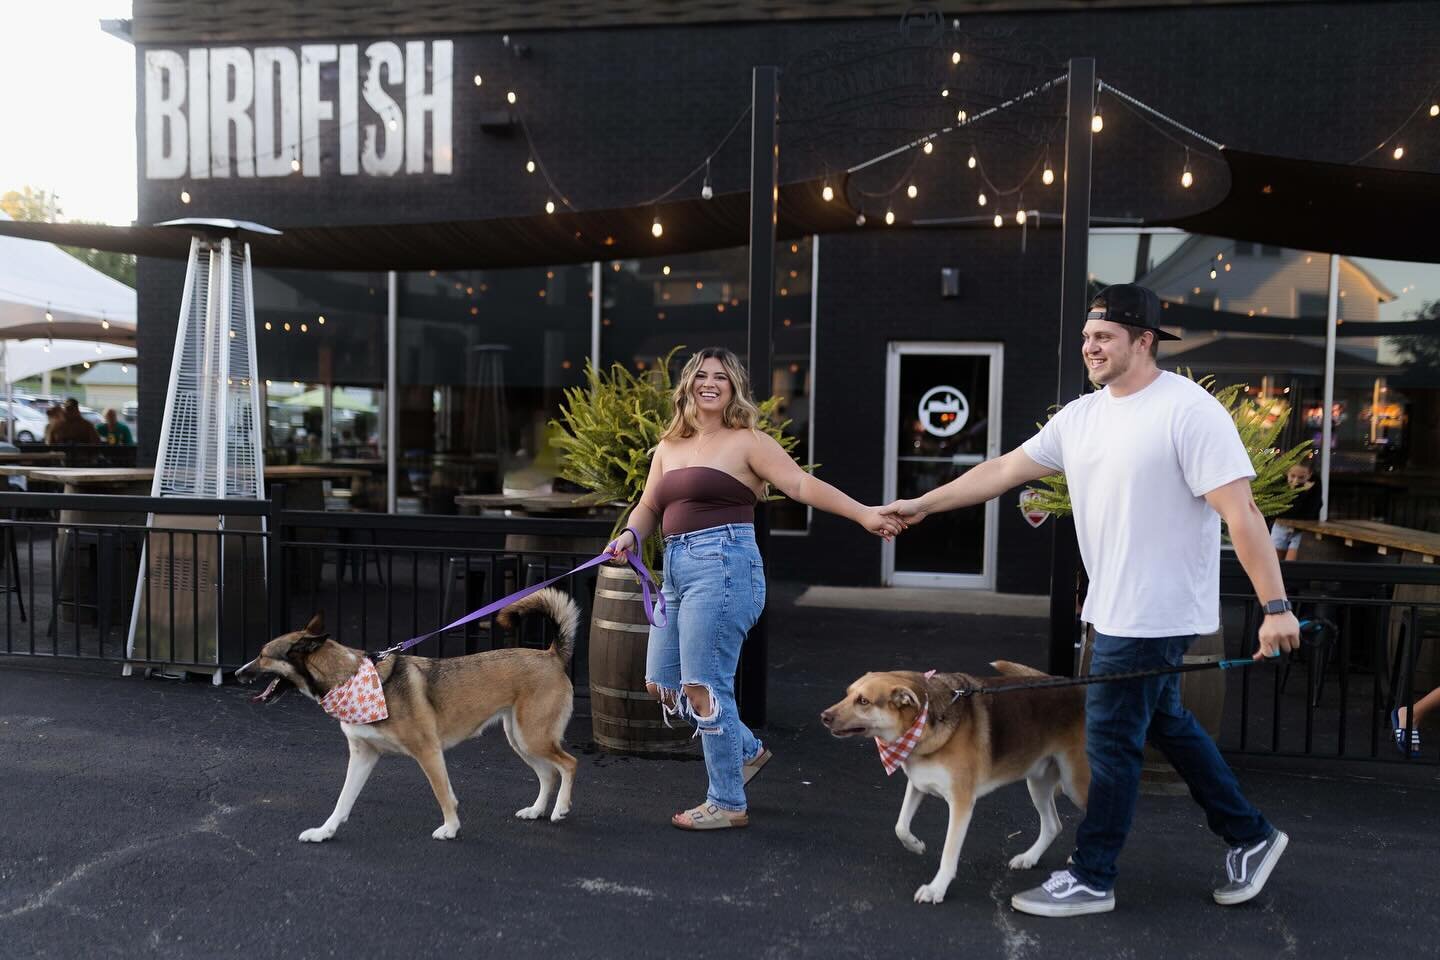 Embrace the perfect day out: blue skies above, a cold craft beer in your hand, and your faithful four-legged friend by your side 🌤️🍺🐕 

Our patio is open today at 4 and we&rsquo;re dog friendly. @atownburgers food truck today serving 5-8